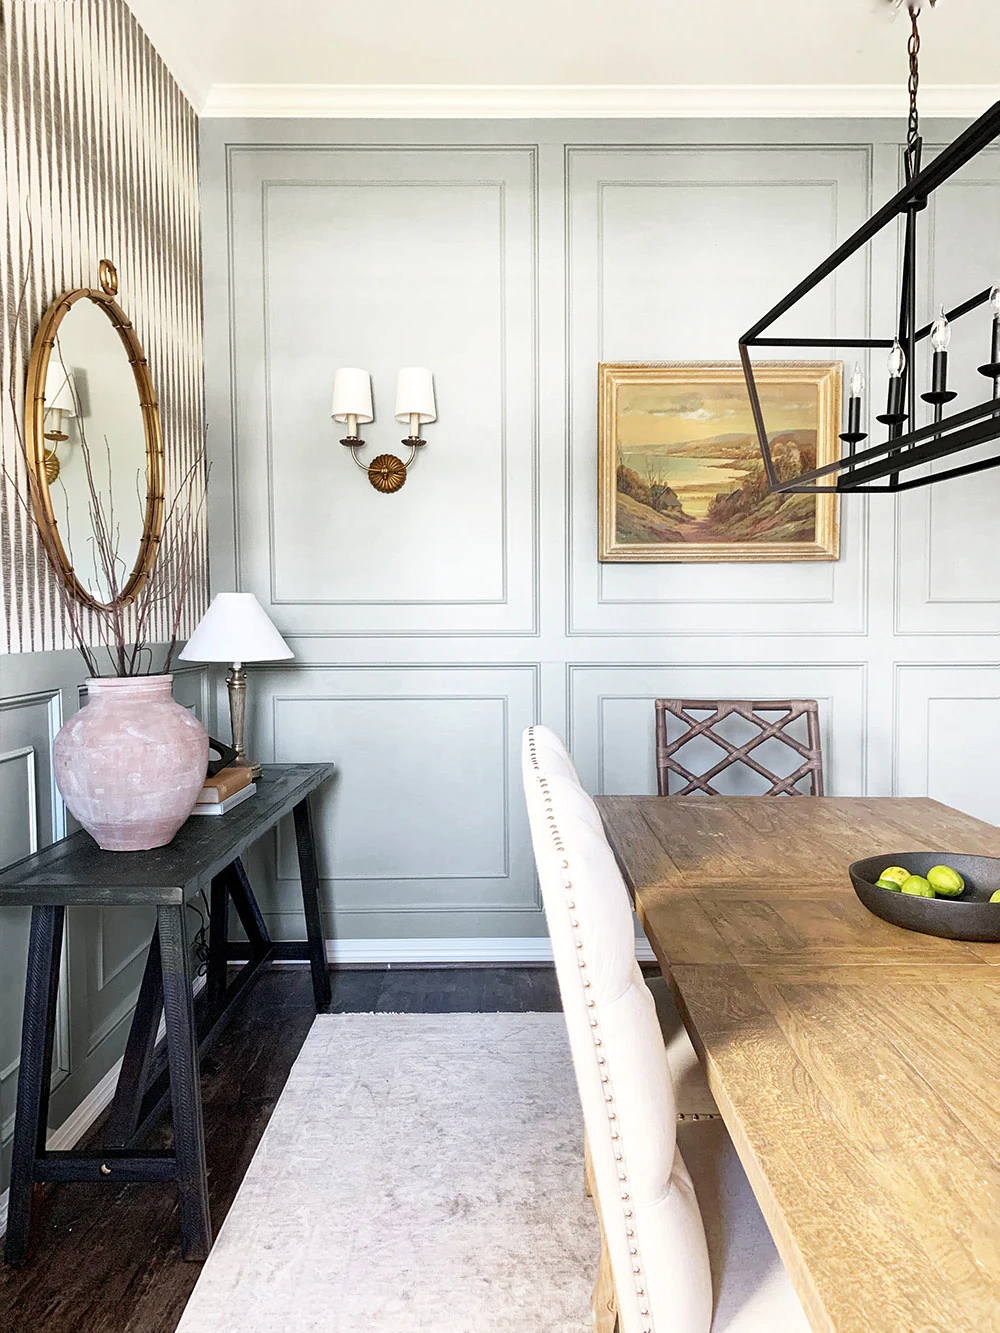 Pennies for a Fortune - Dining Room Makeover